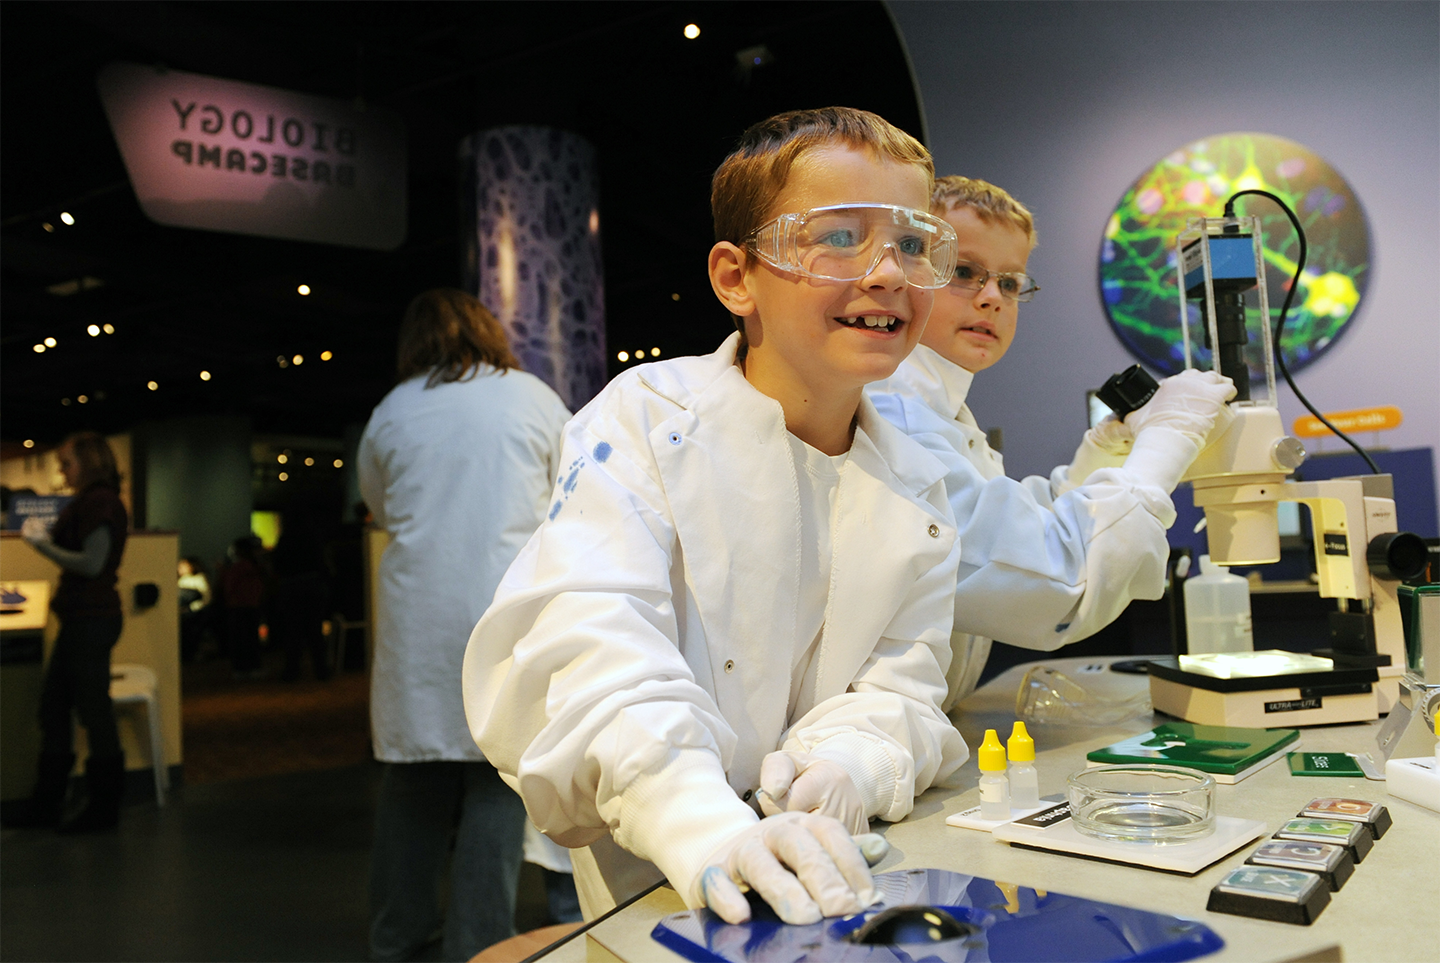 Two young boys wearing white lab coats, gloves, and safety goggles working with scientific equipment that is part of a museum exhibit